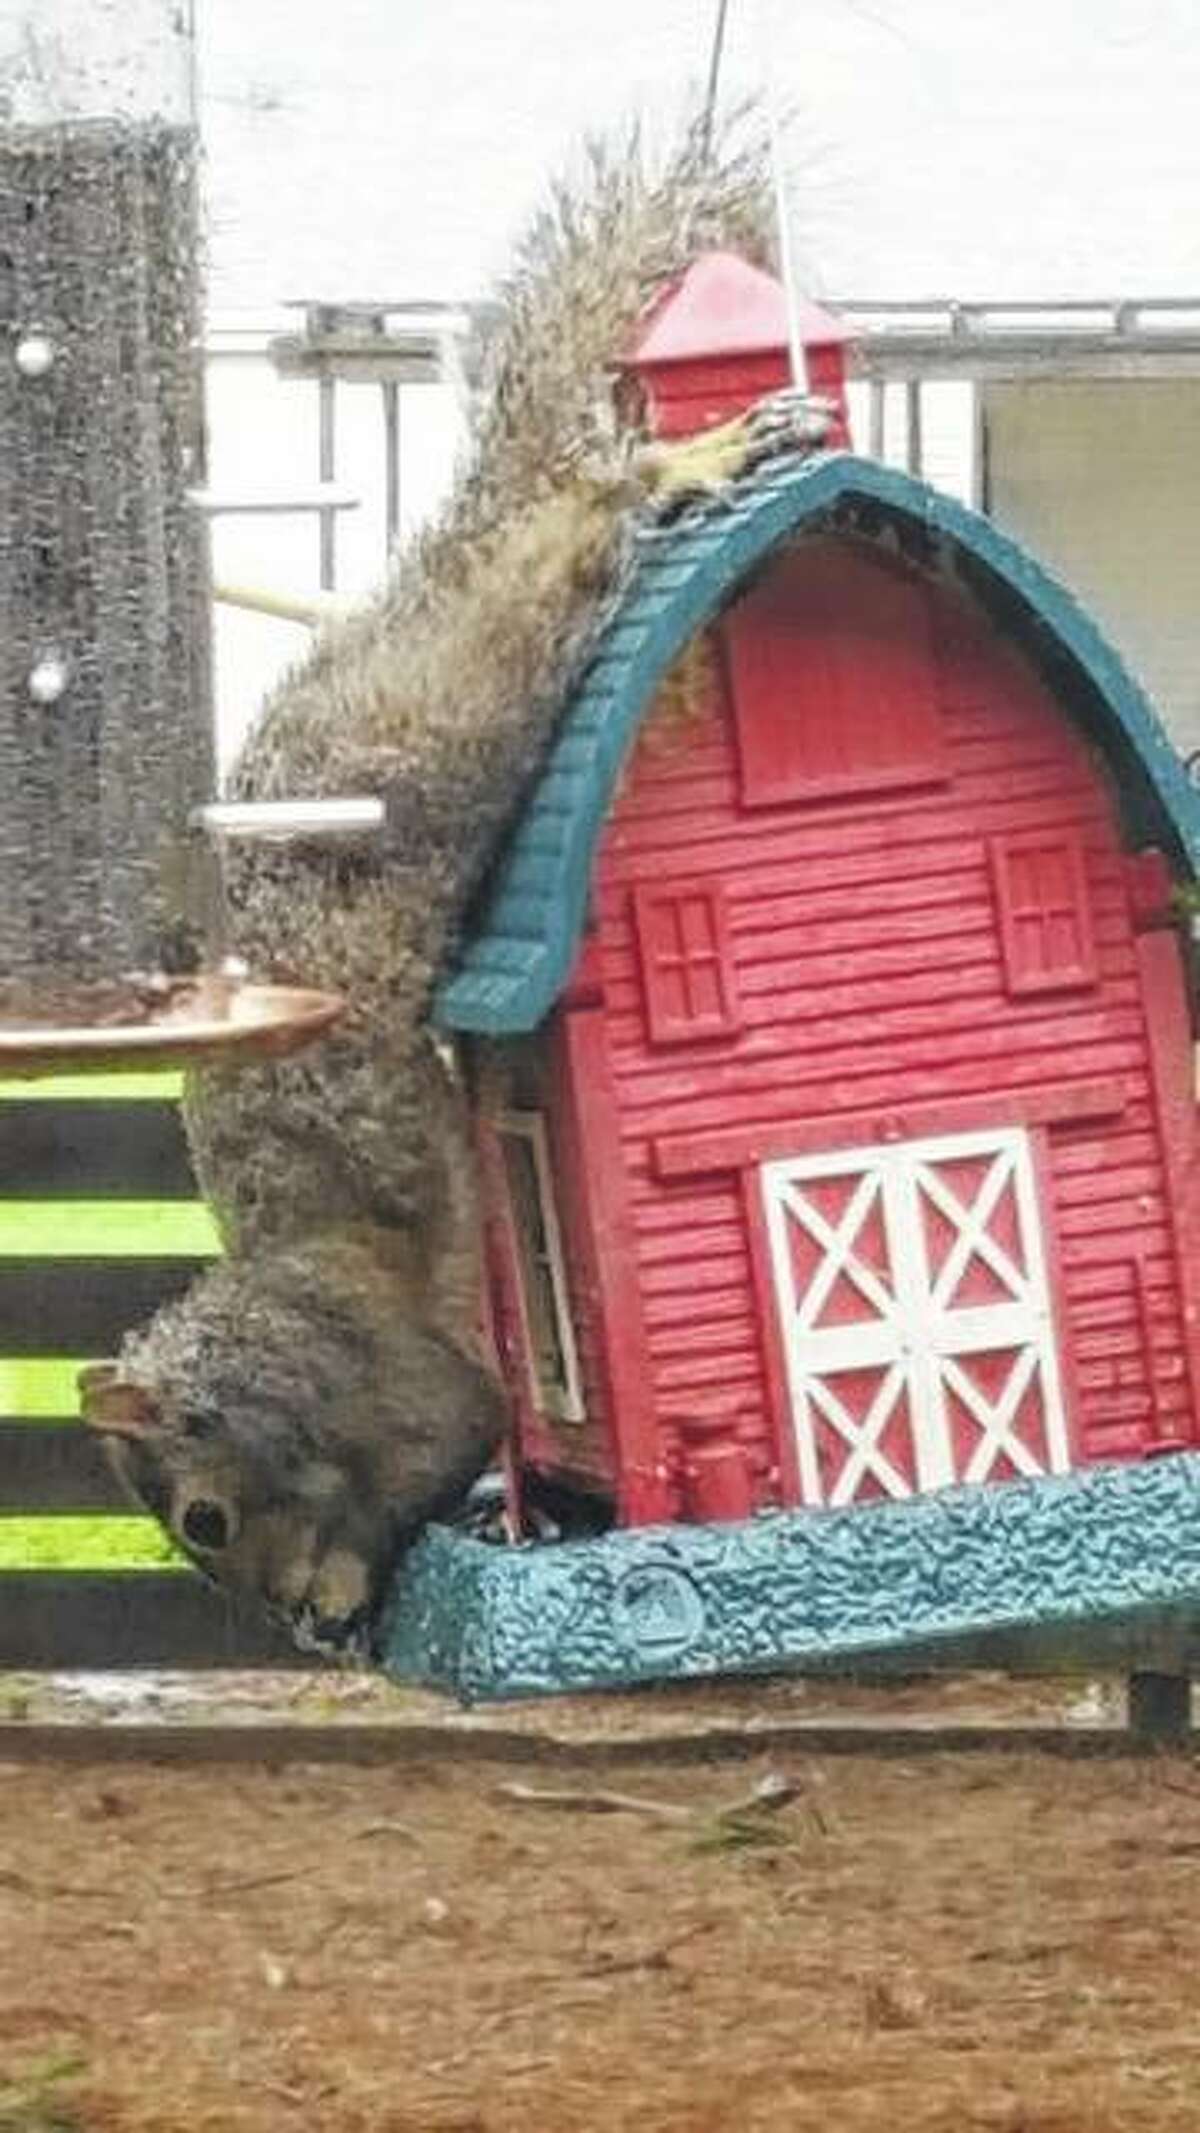 A squirrel performs a few acts of agility to get to seeds in a bird feeder.